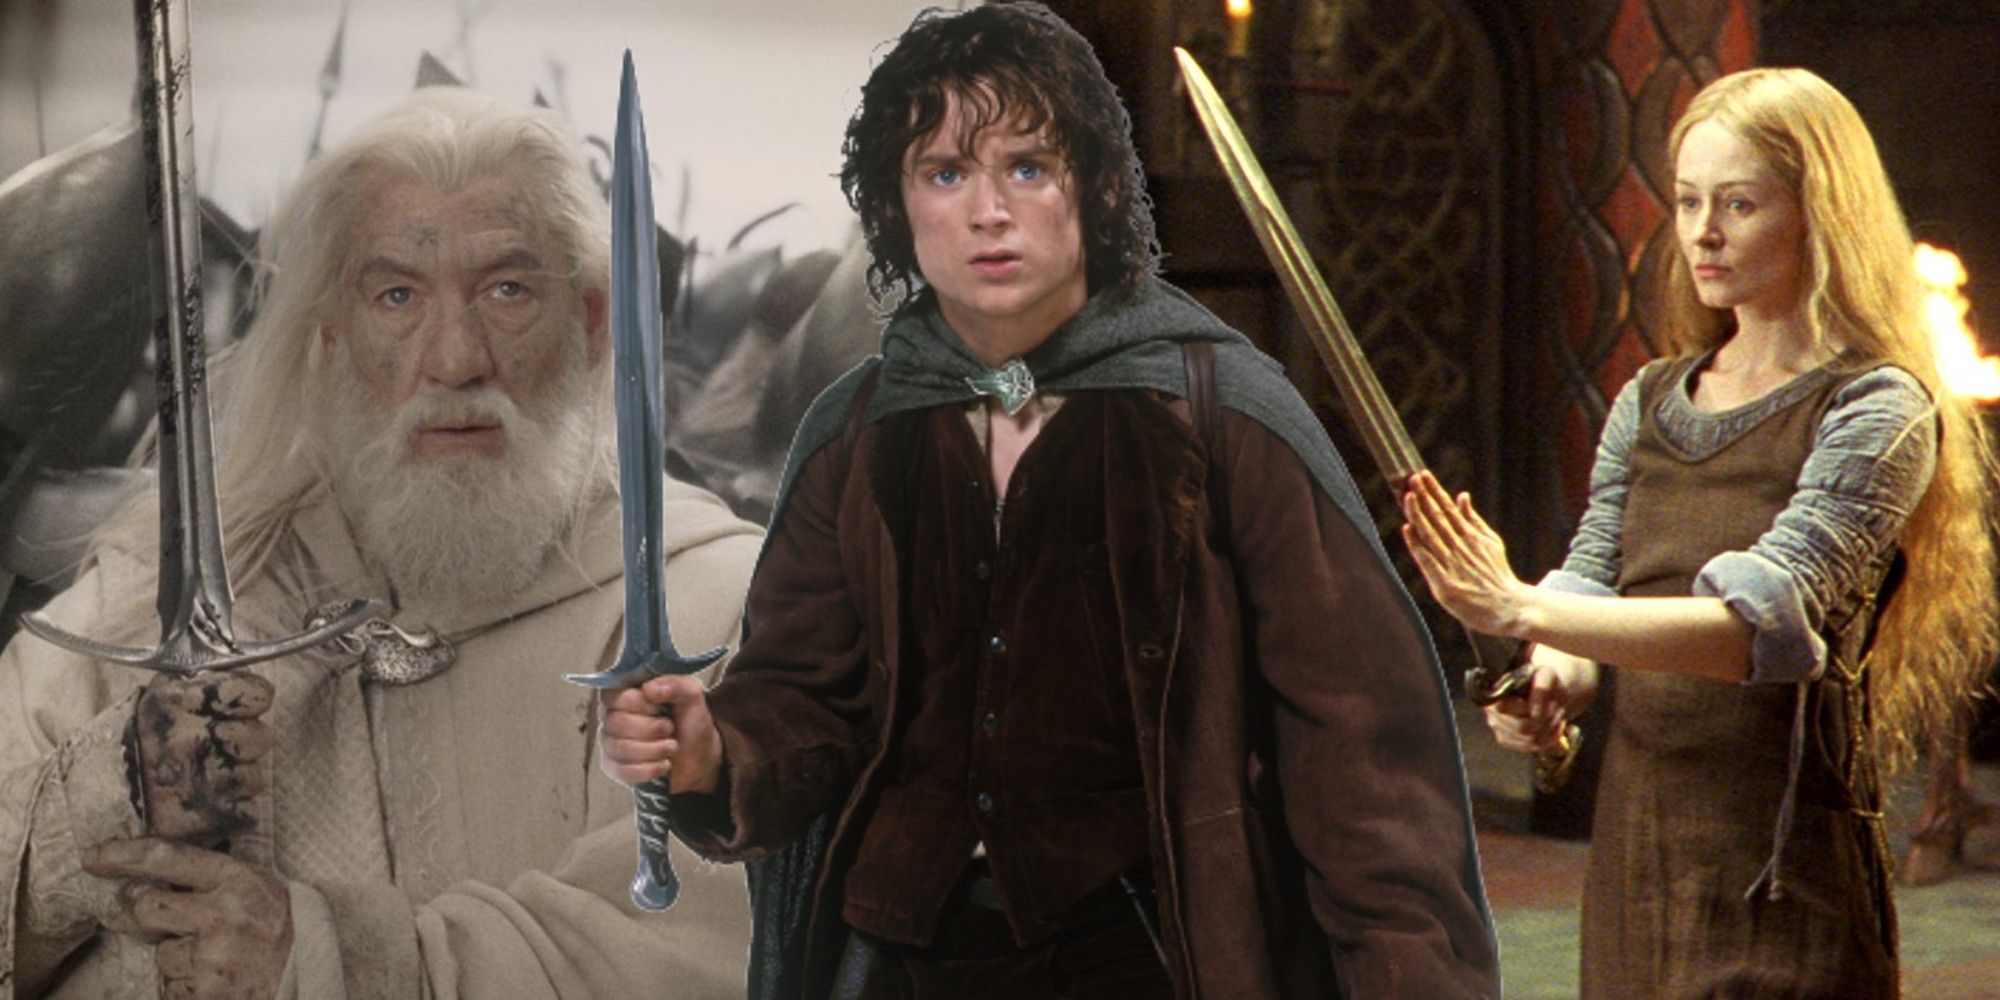 Split image of Gandalf, Frodo and Eowyn from The Lord of the Rings movies